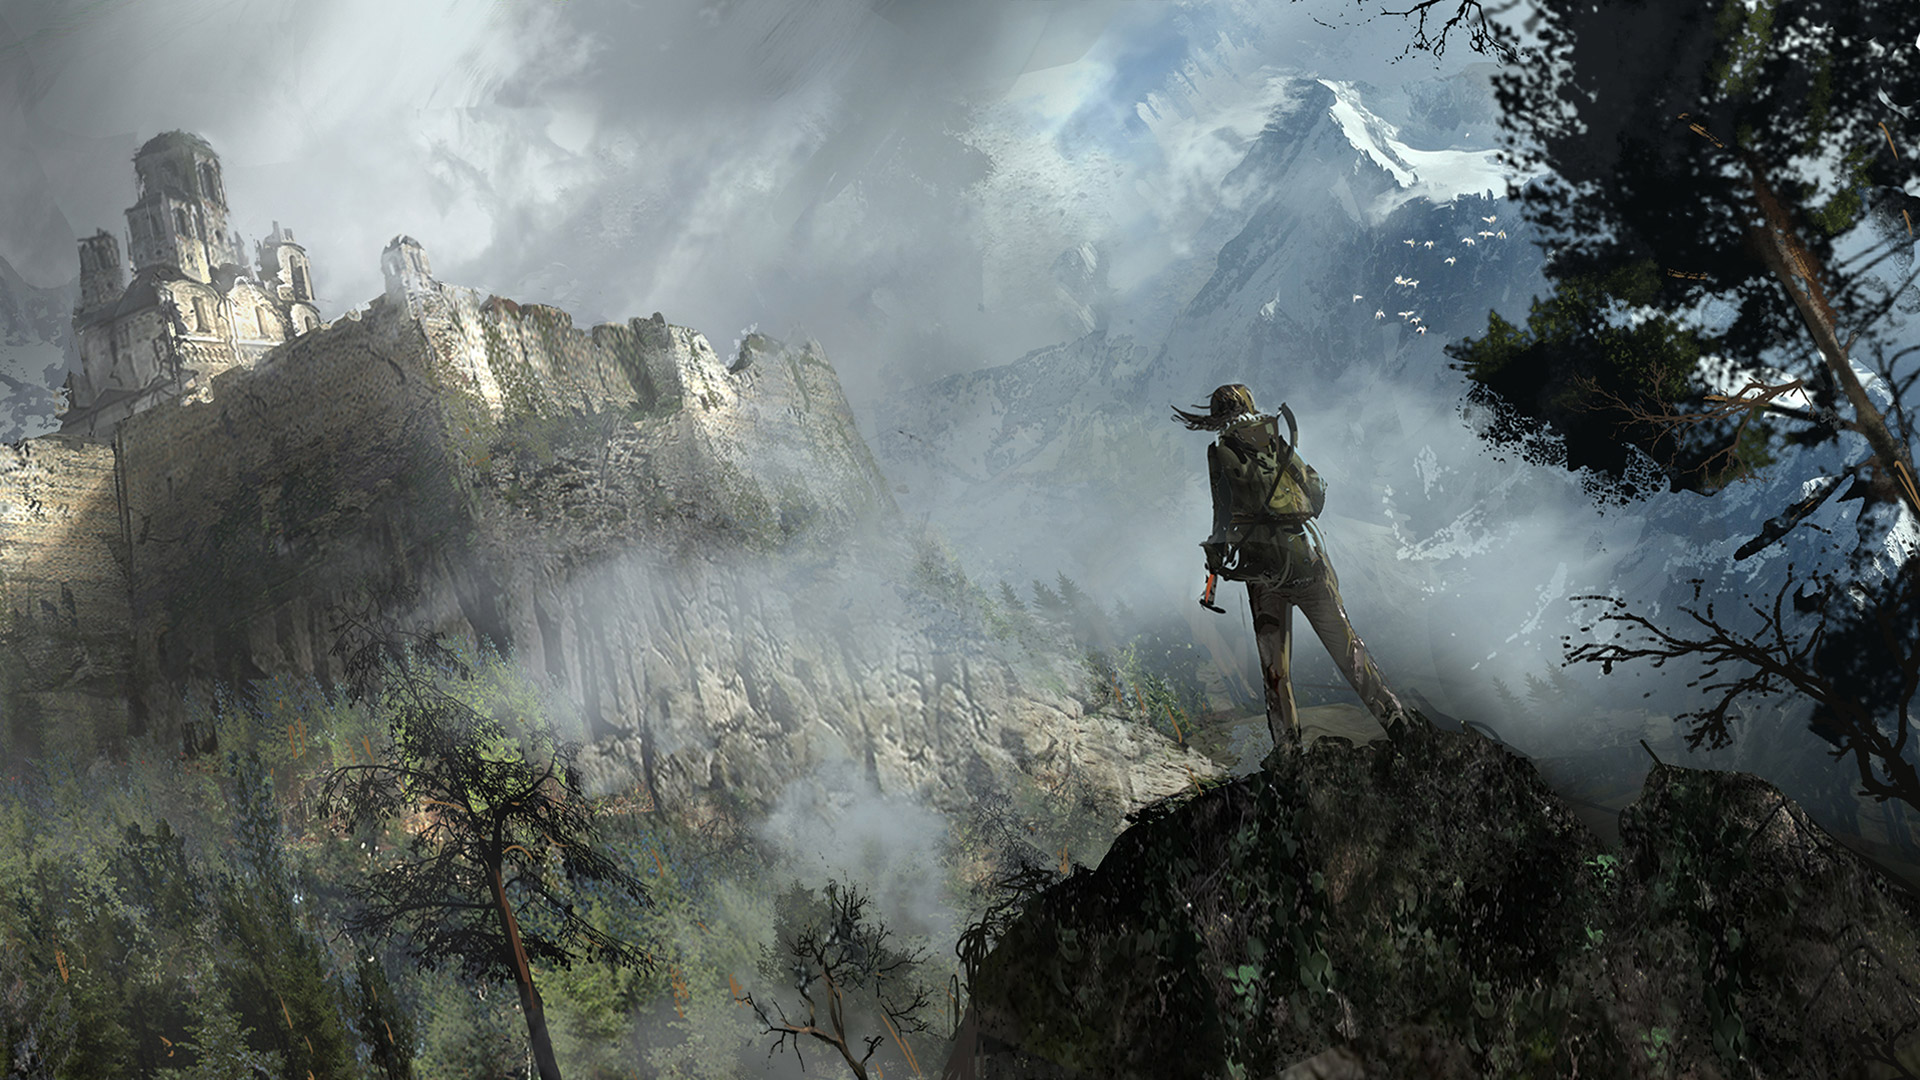 Free Rise Of The Tomb Raider Wallpaper In - Rise Of The Tomb Raider  Conceptart - 1920x1080 Wallpaper 